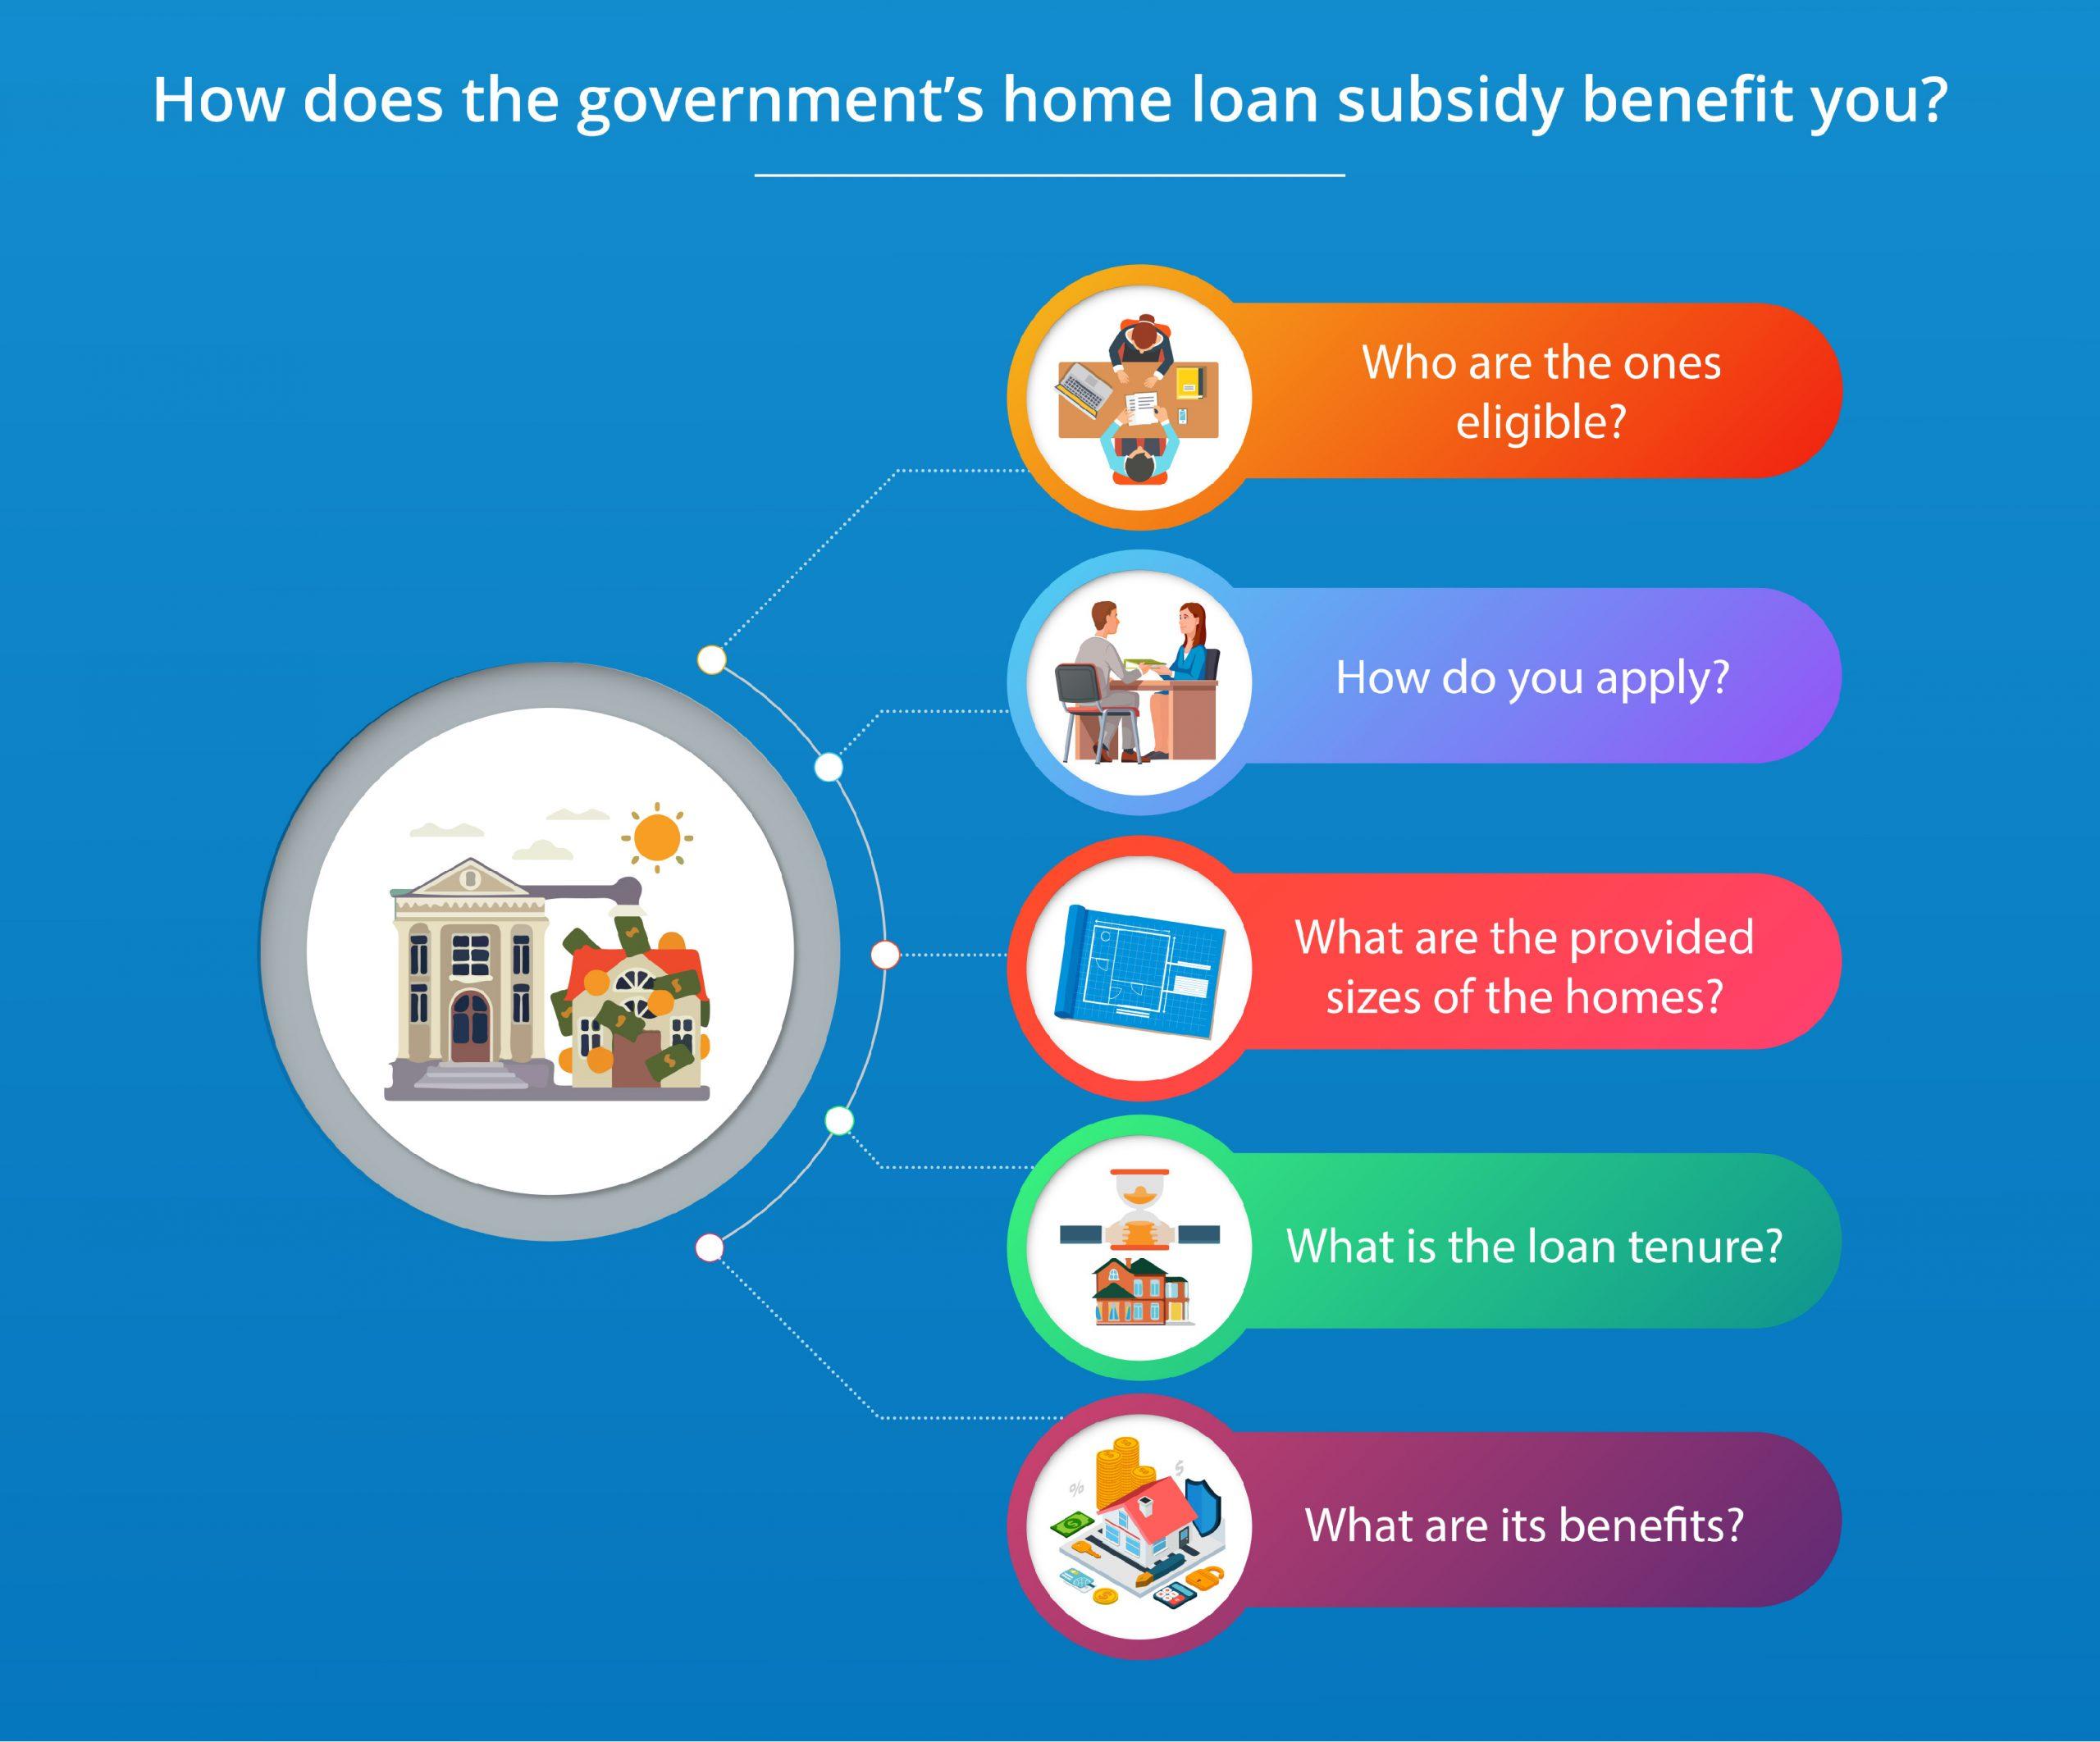 How does the government’s home loan subsidy benefit you?